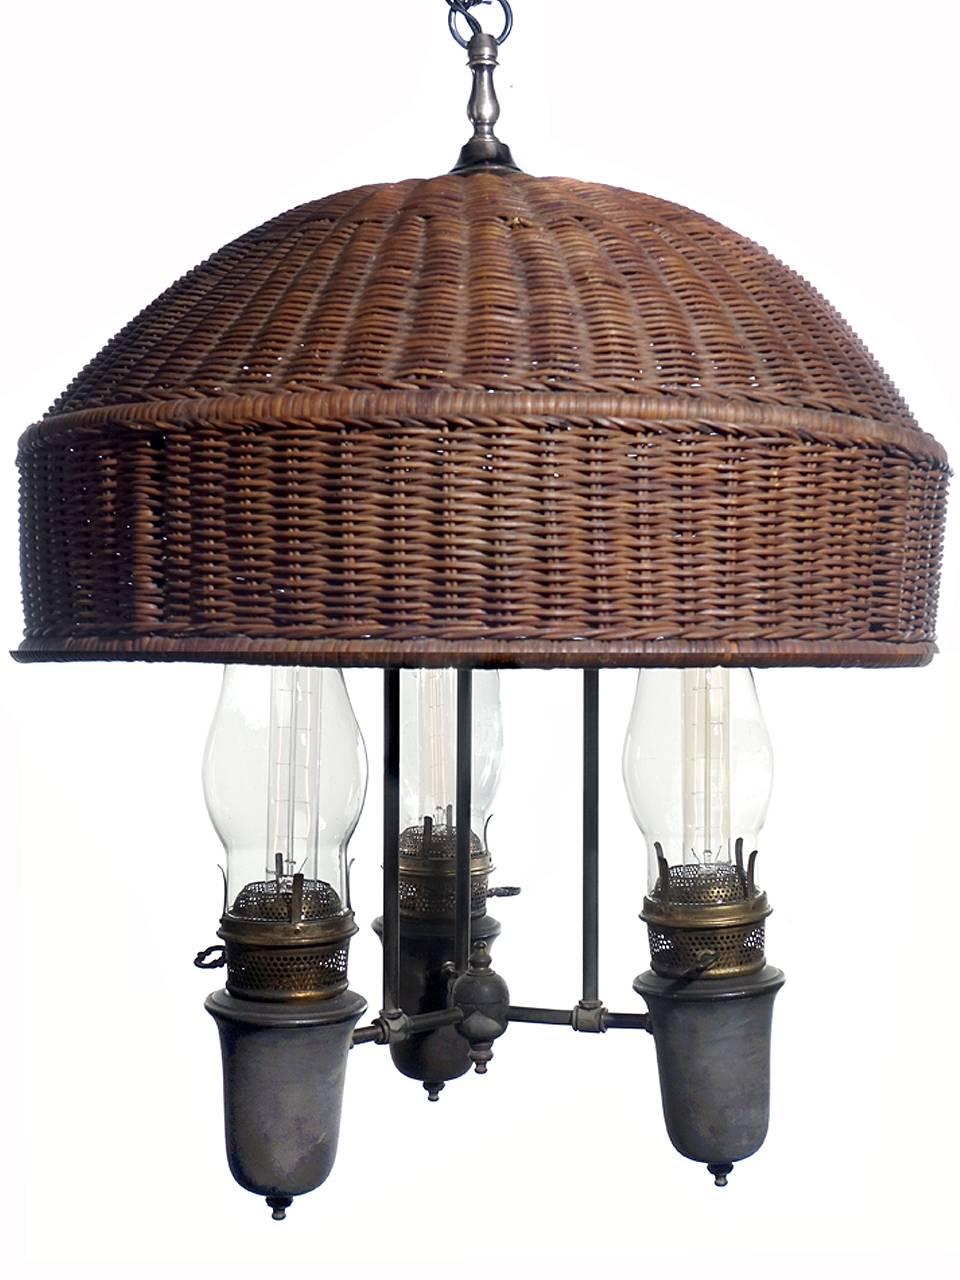 American Large Arts and Crafts Wicker Shade Chandelier